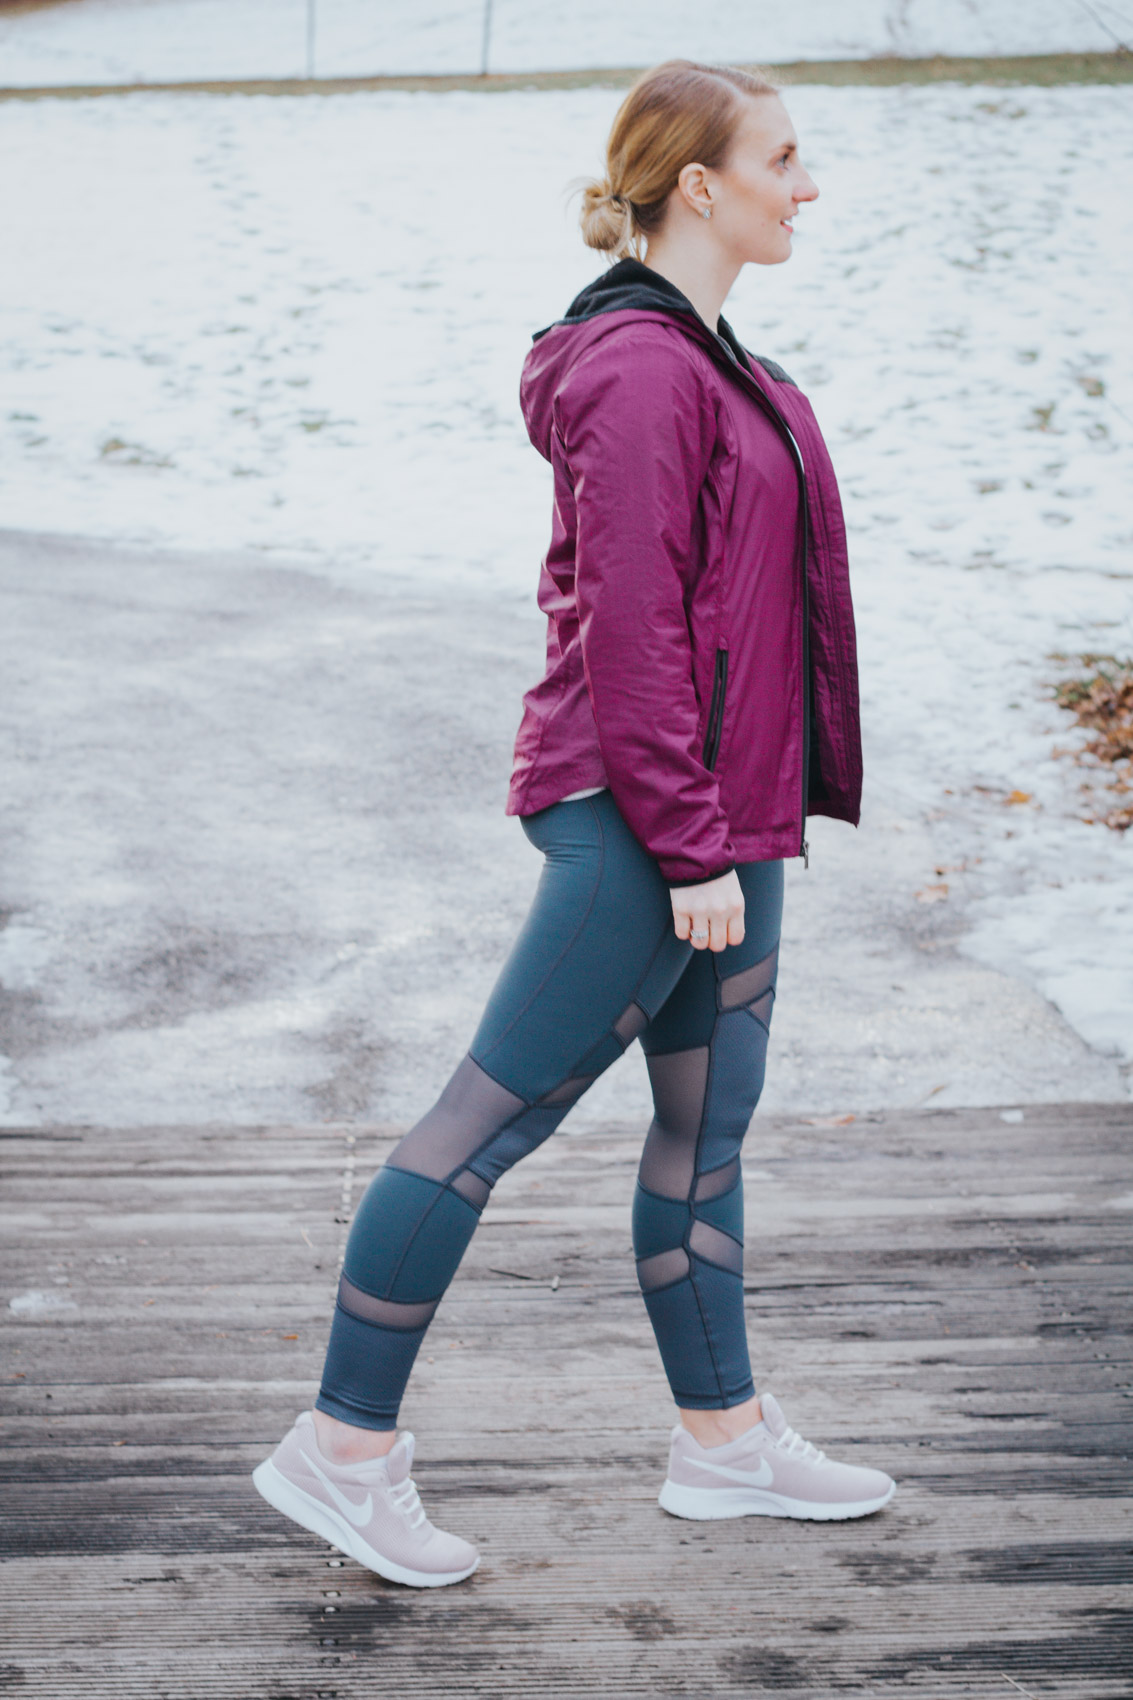 Lifestyle blogger, Allyn Lewis of The Gem, styles a winter workout look with a purple Columbia Sportswear jacket and CALIA by Carrie Underwood leggings.